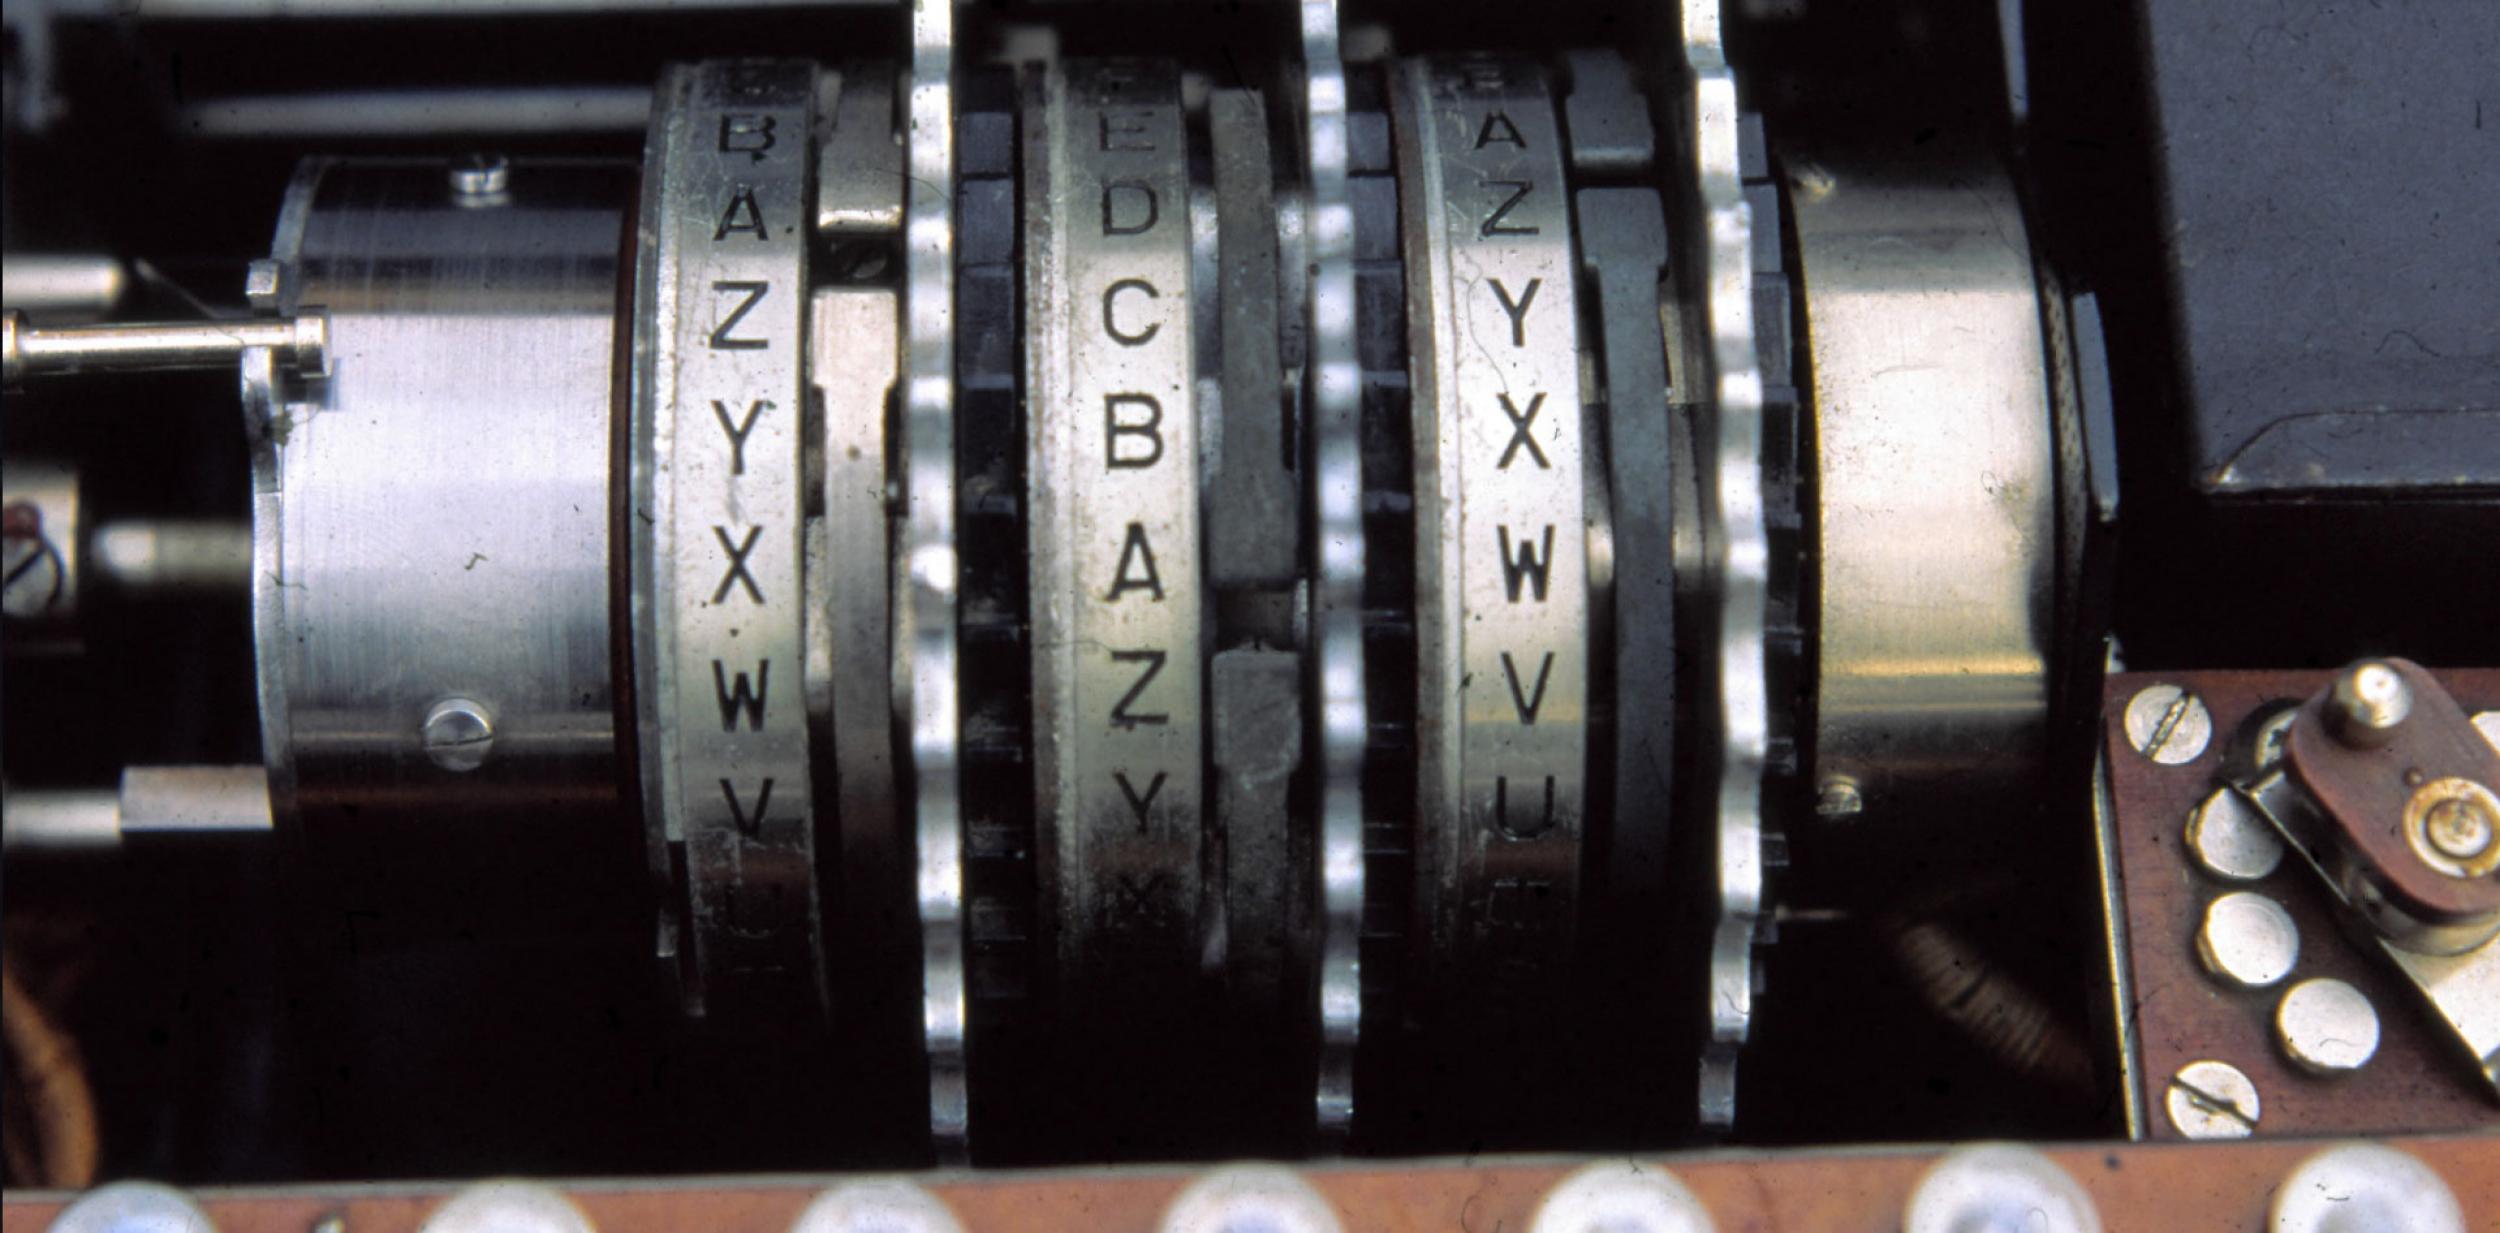 Close up of the Enigma machine showing dials of the alphabet.